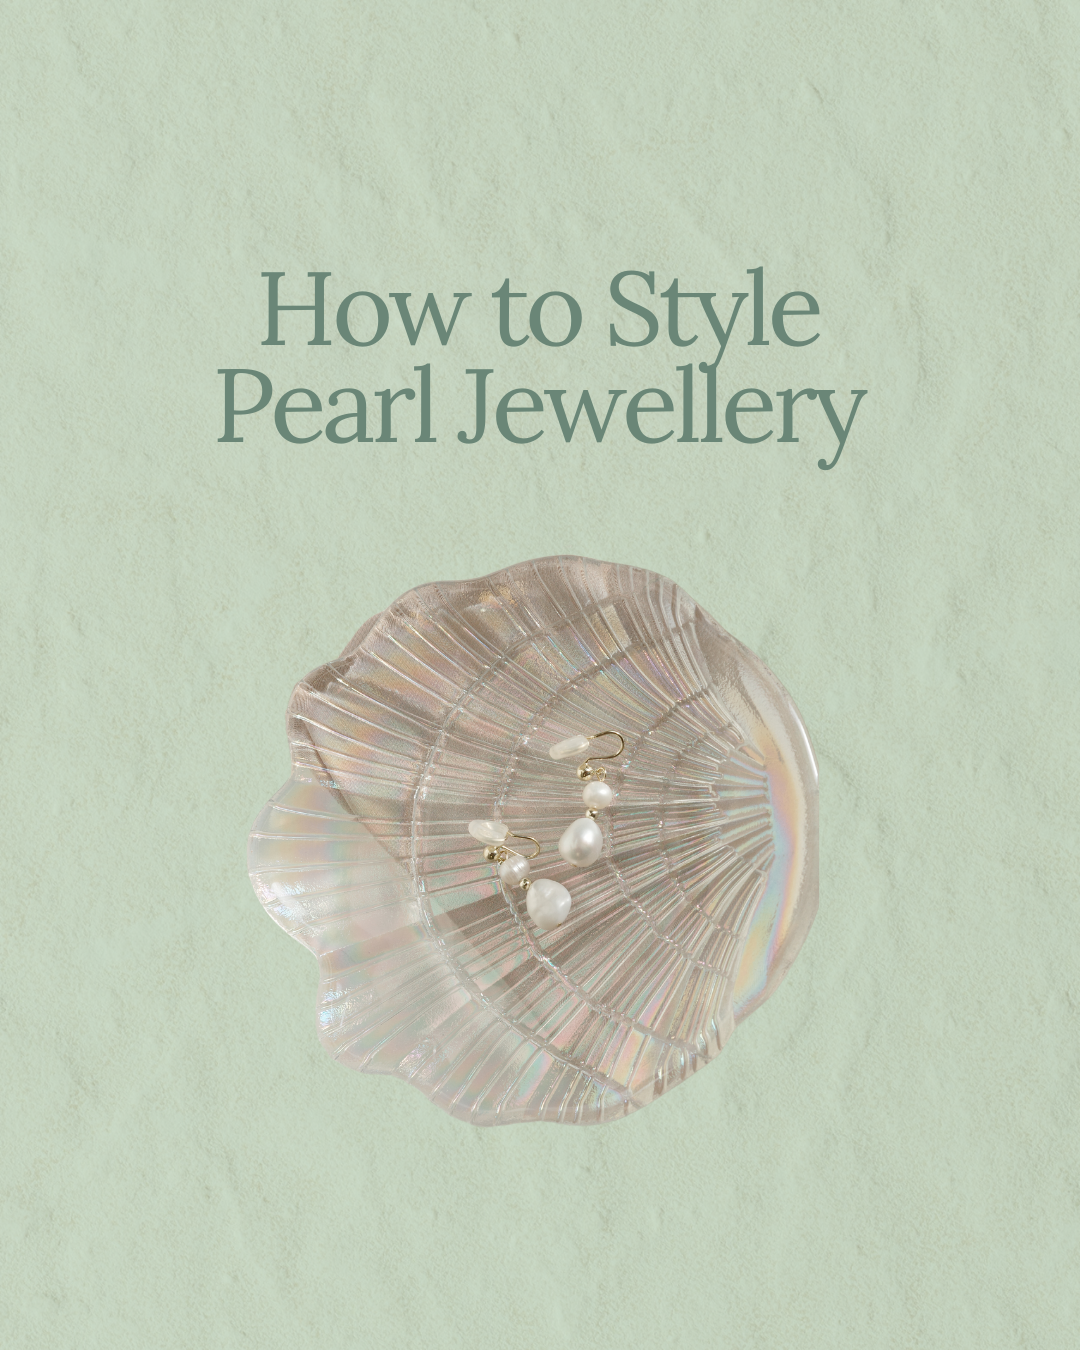 How to style pearl jewelry